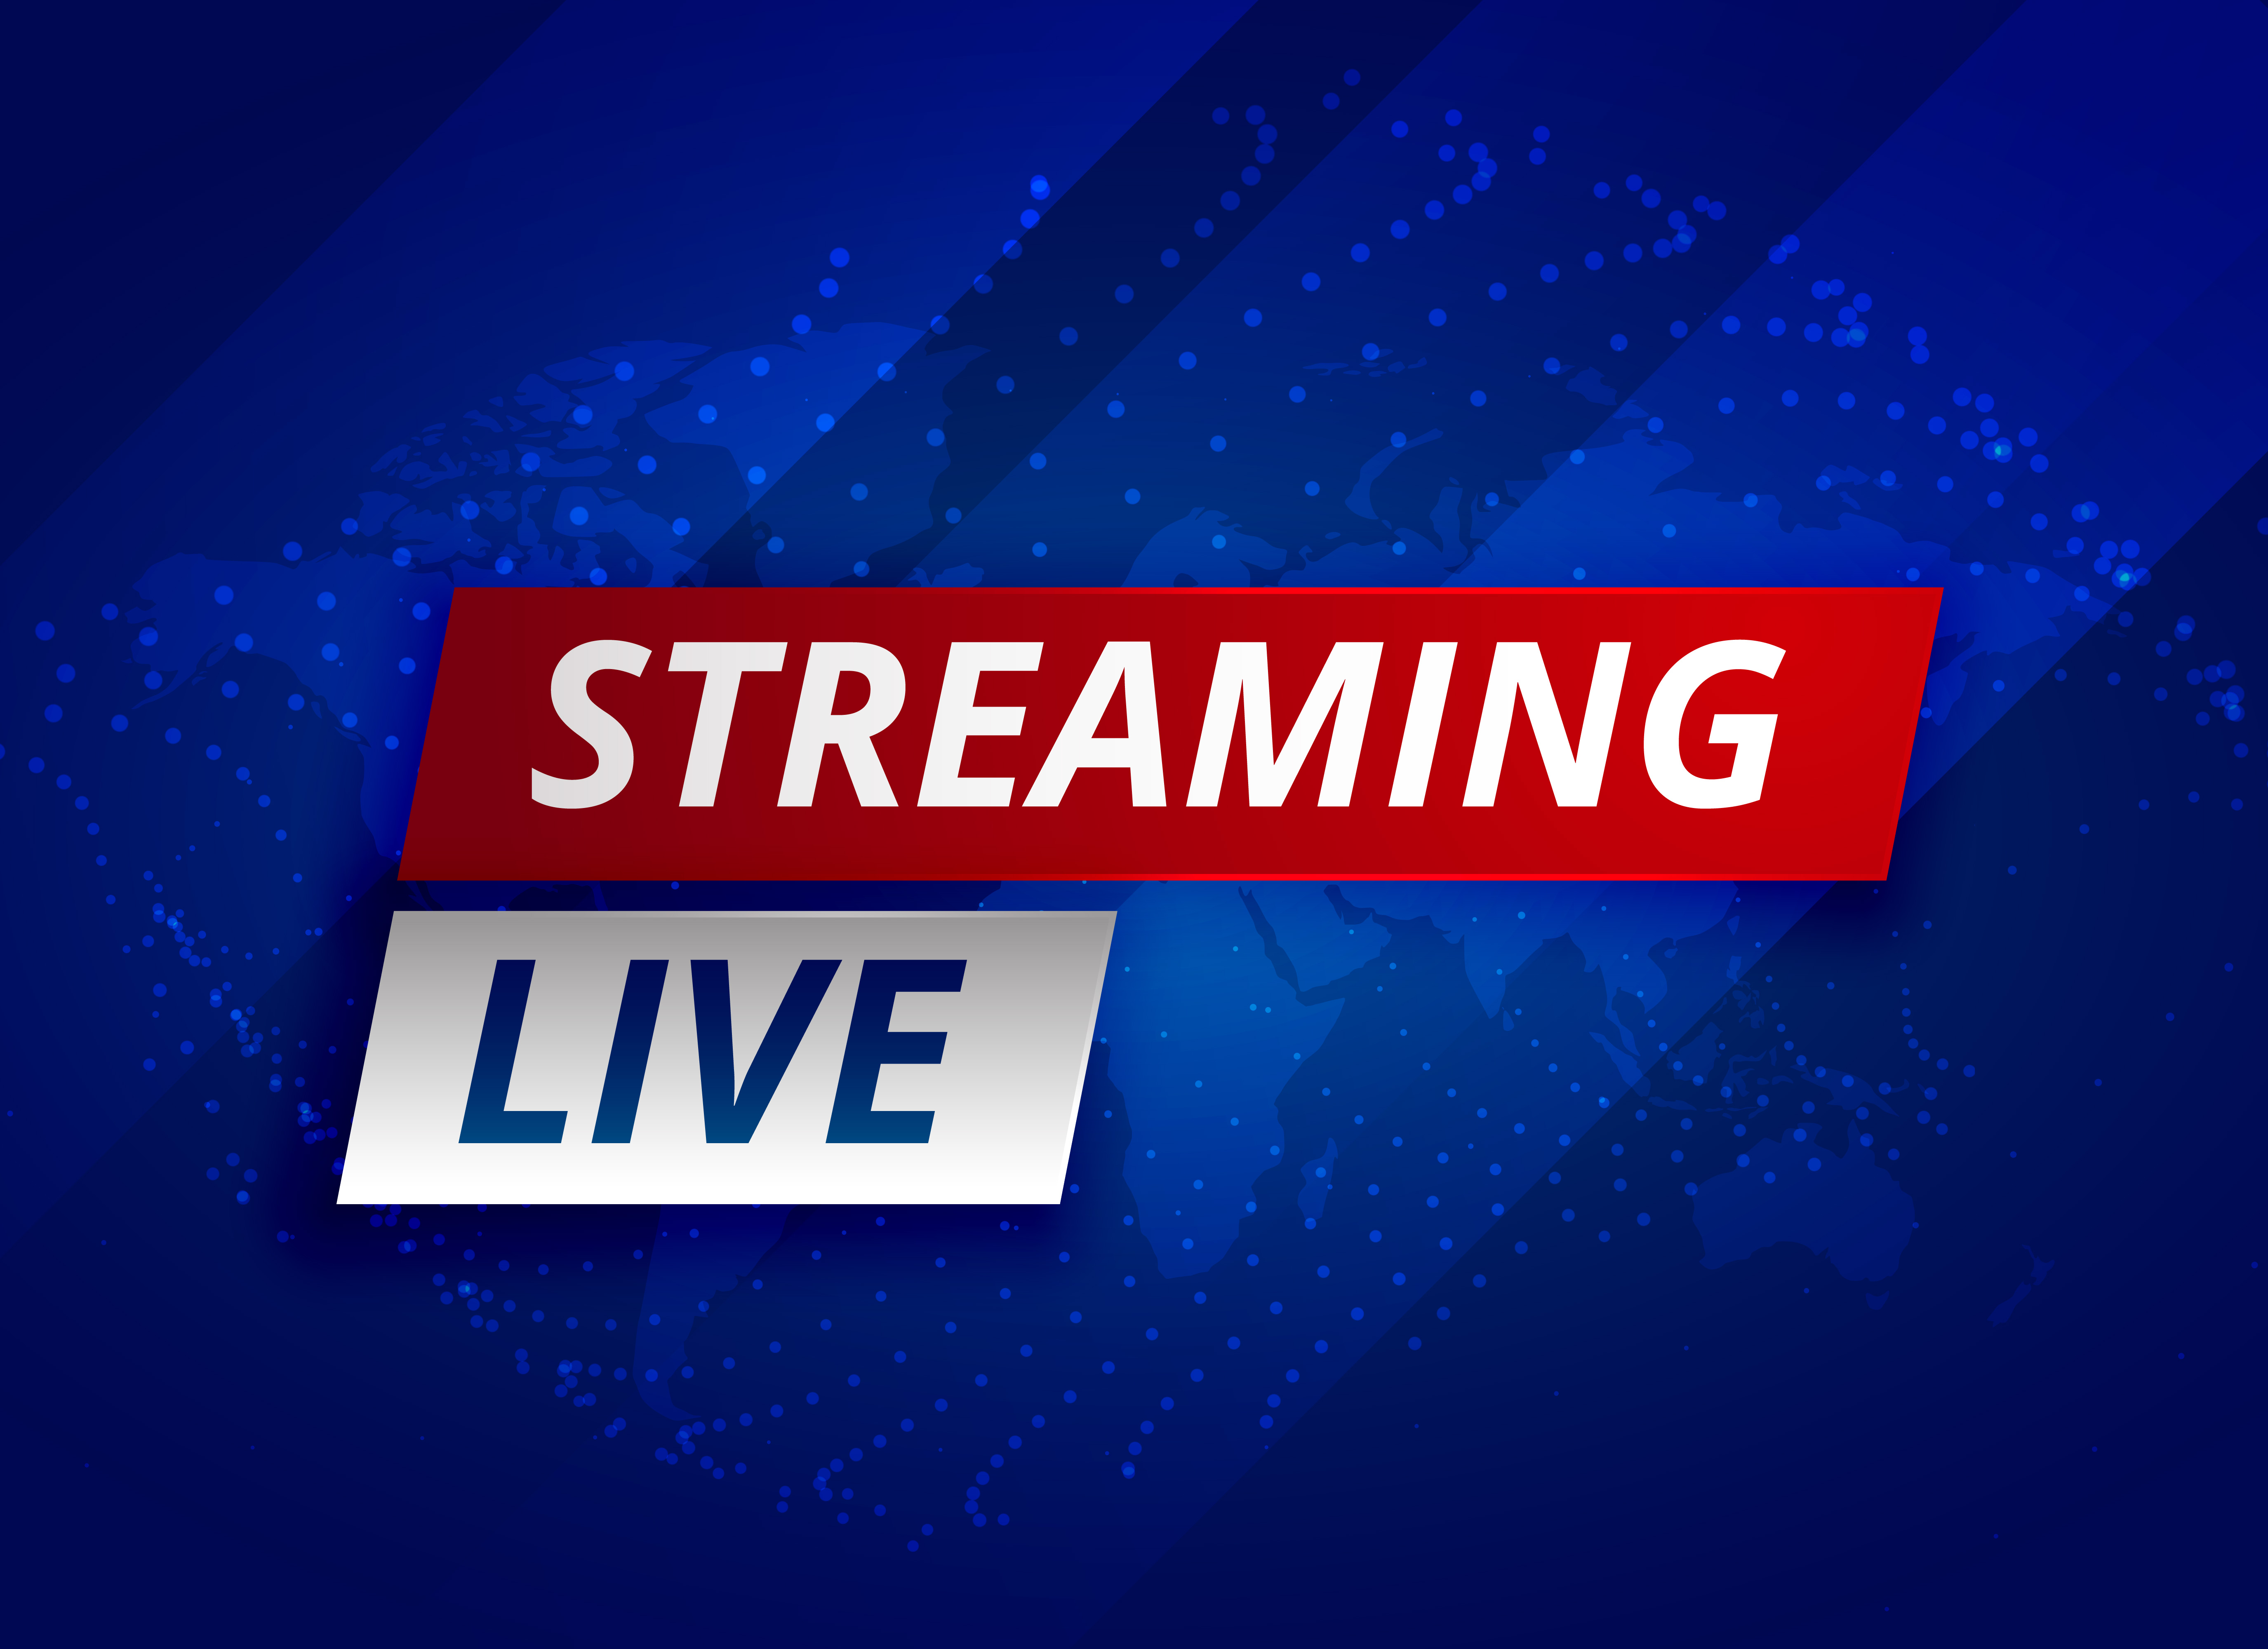 streaming-live-news-background-template-download-free-vector-art